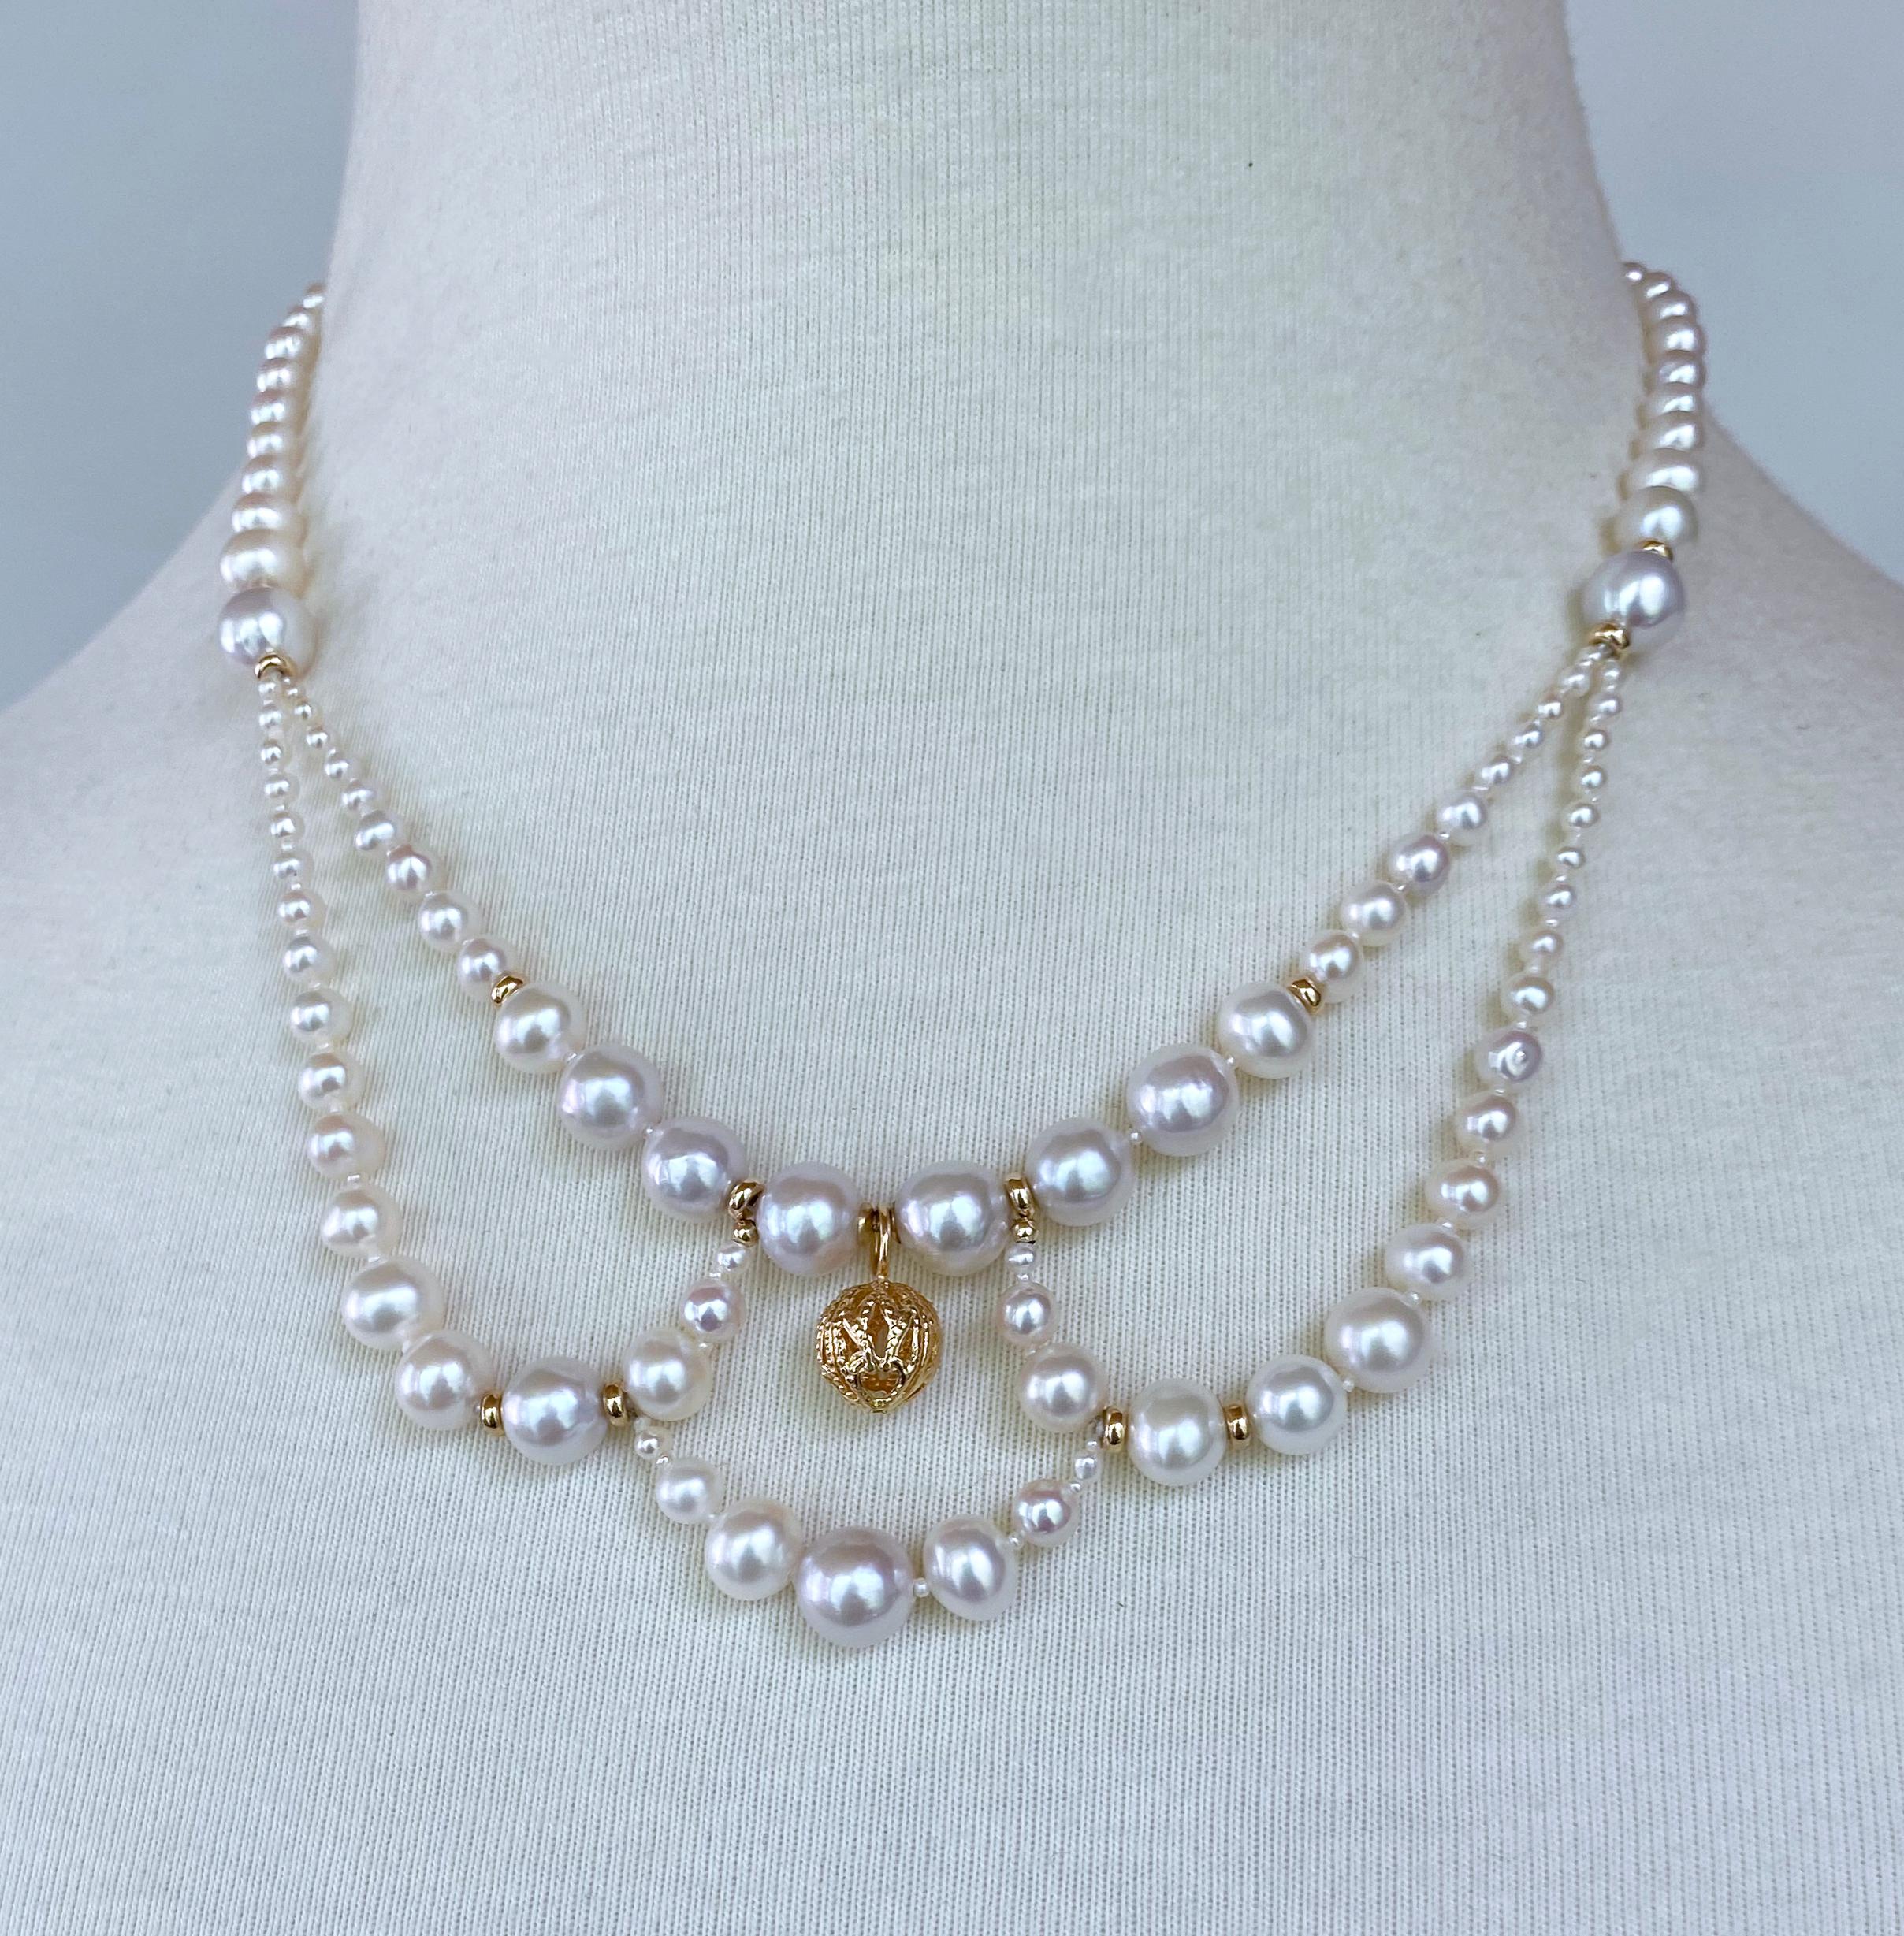 Marina J. Draped Victorian Inspired Pearl & Solid 14k Yellow Gold Necklace For Sale 1